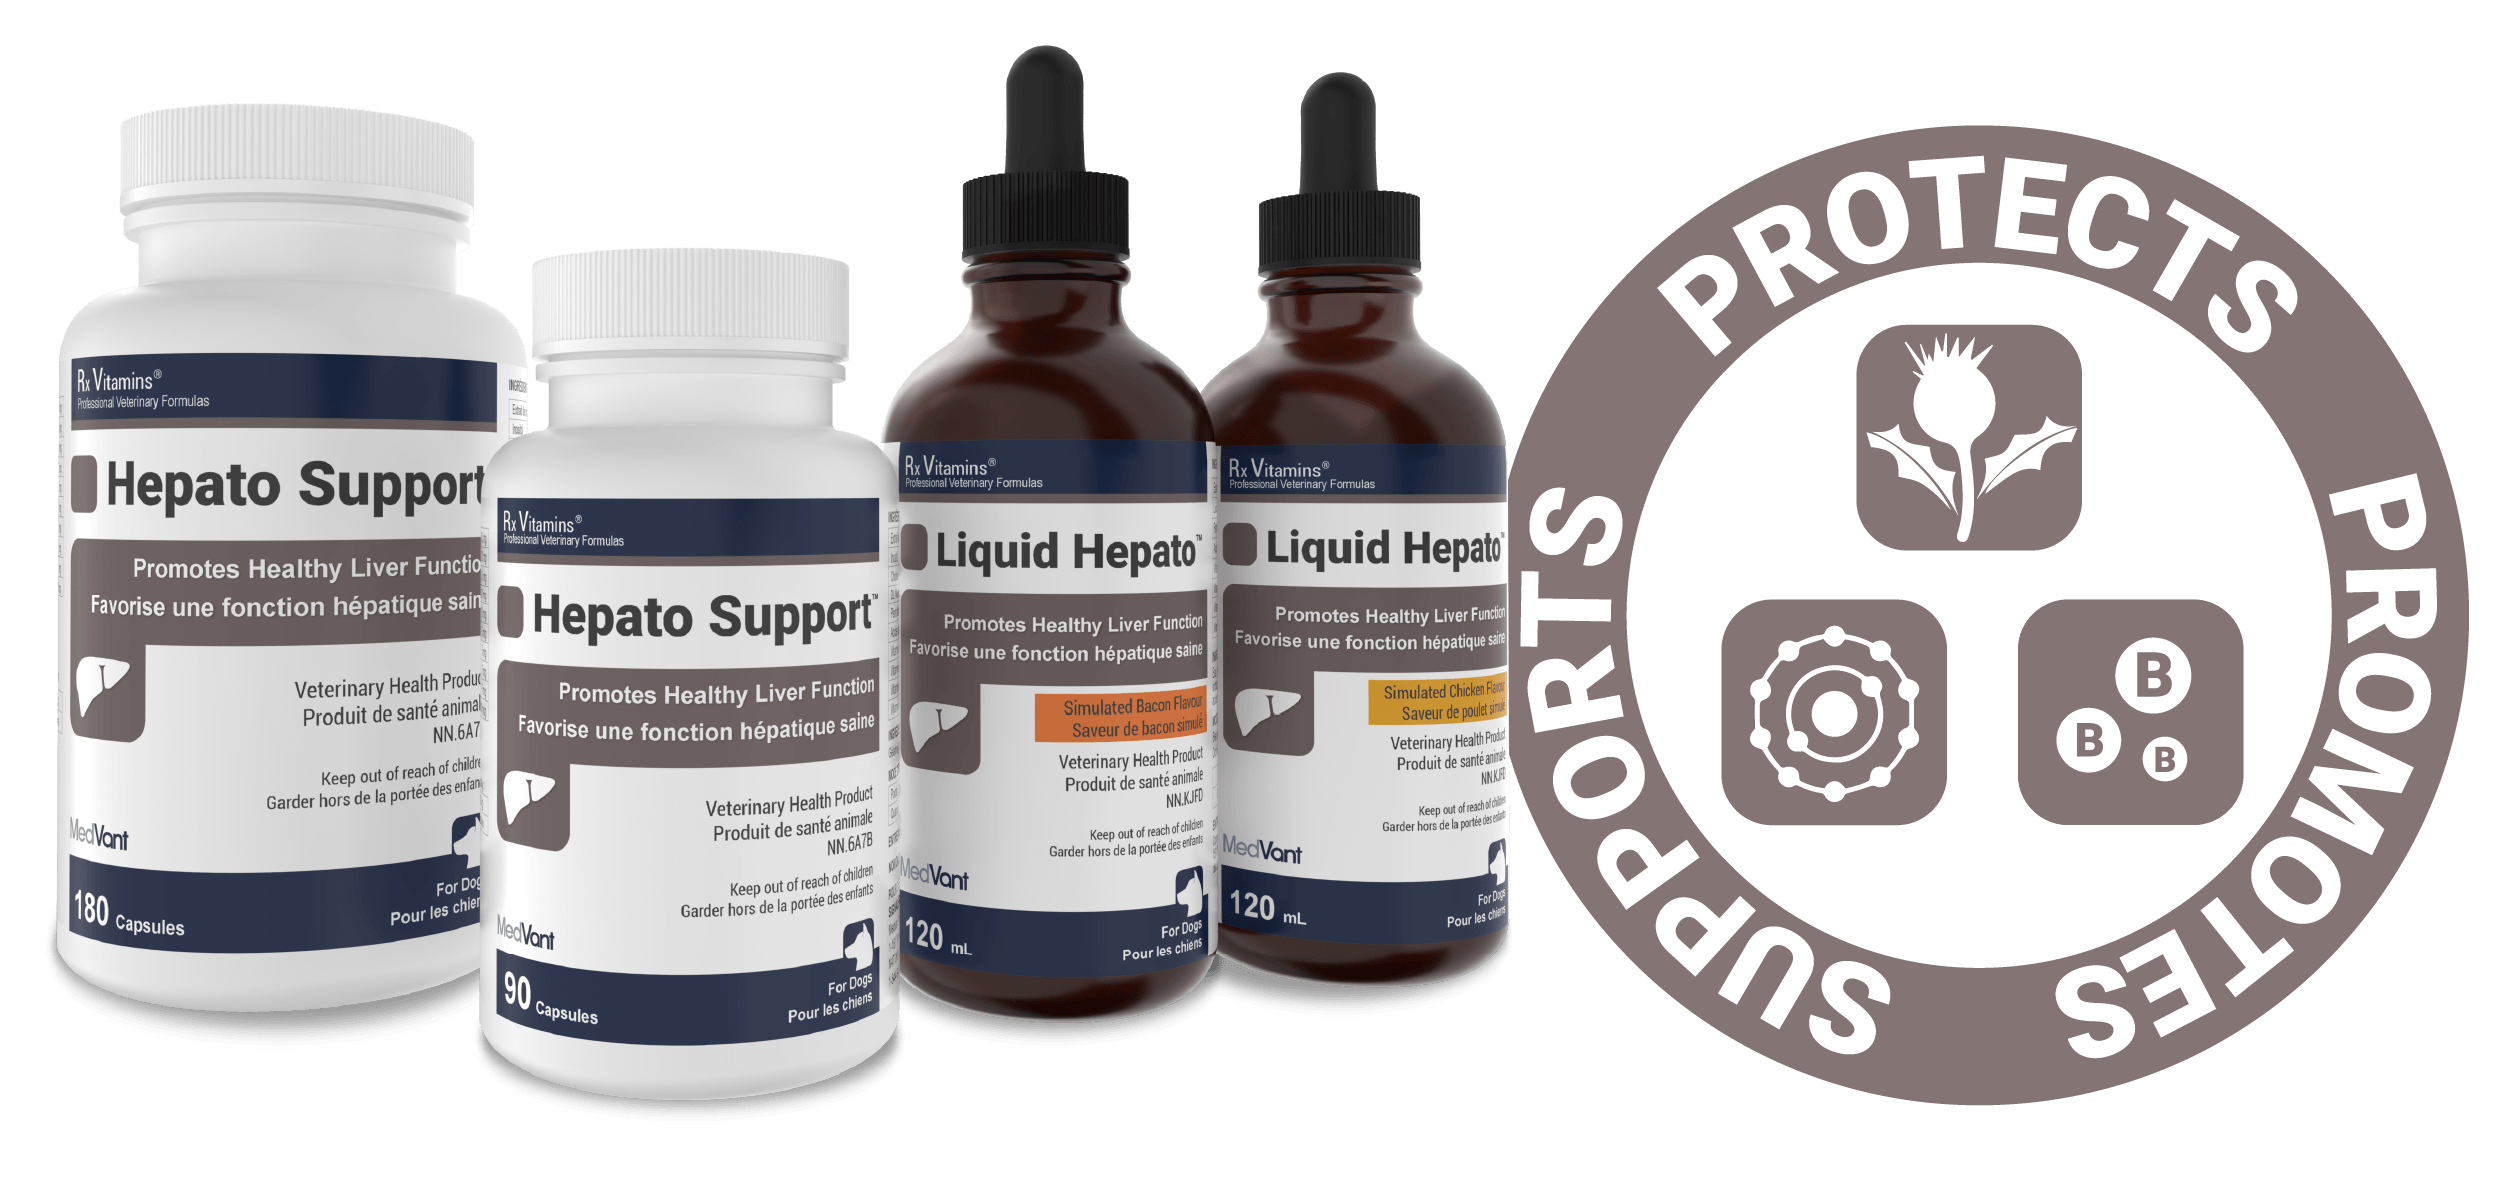 Complete liver support that's easy to give.